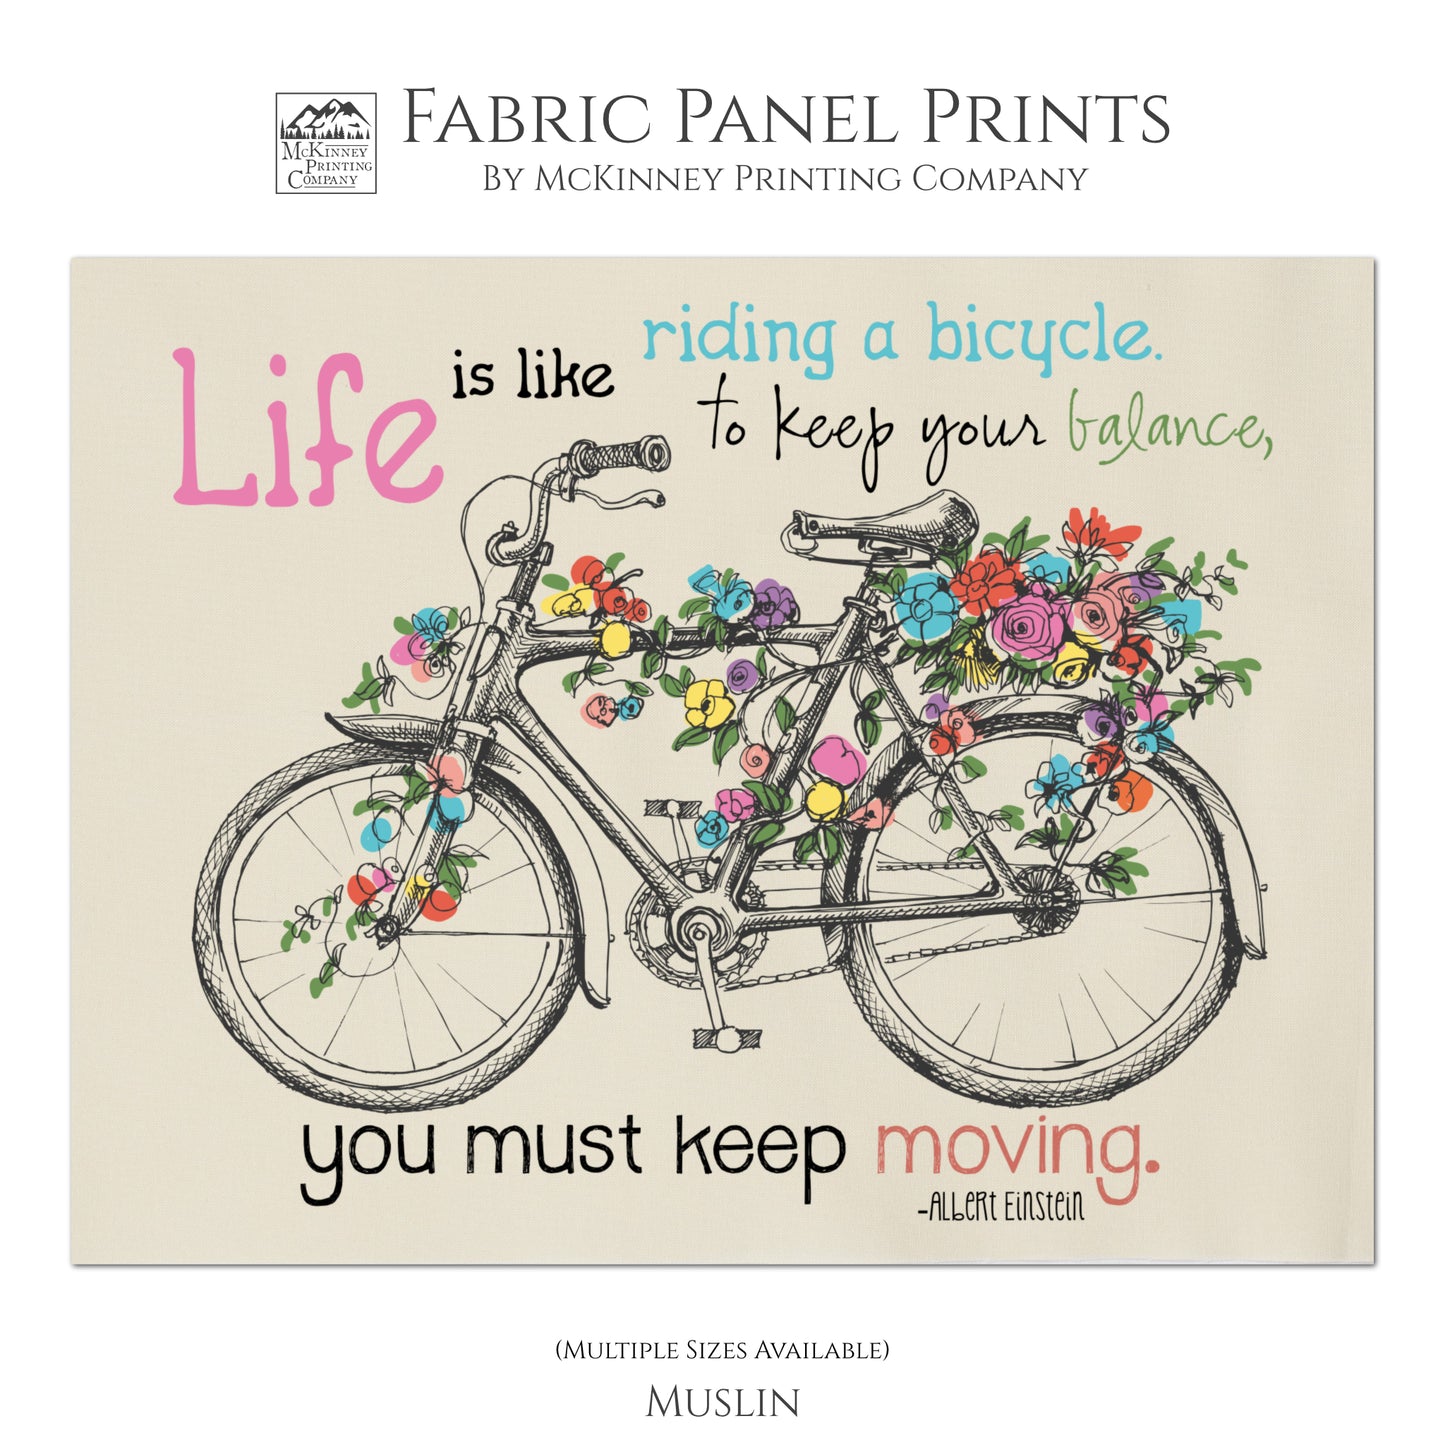 Inspirational Fabric - Albert Einstein Quotes About Life, Cotton Quilt Block, Wall Art, Bike and Flowers - Life is like riding a bicycle.  To keep your balance, you must keep moving - Muslin